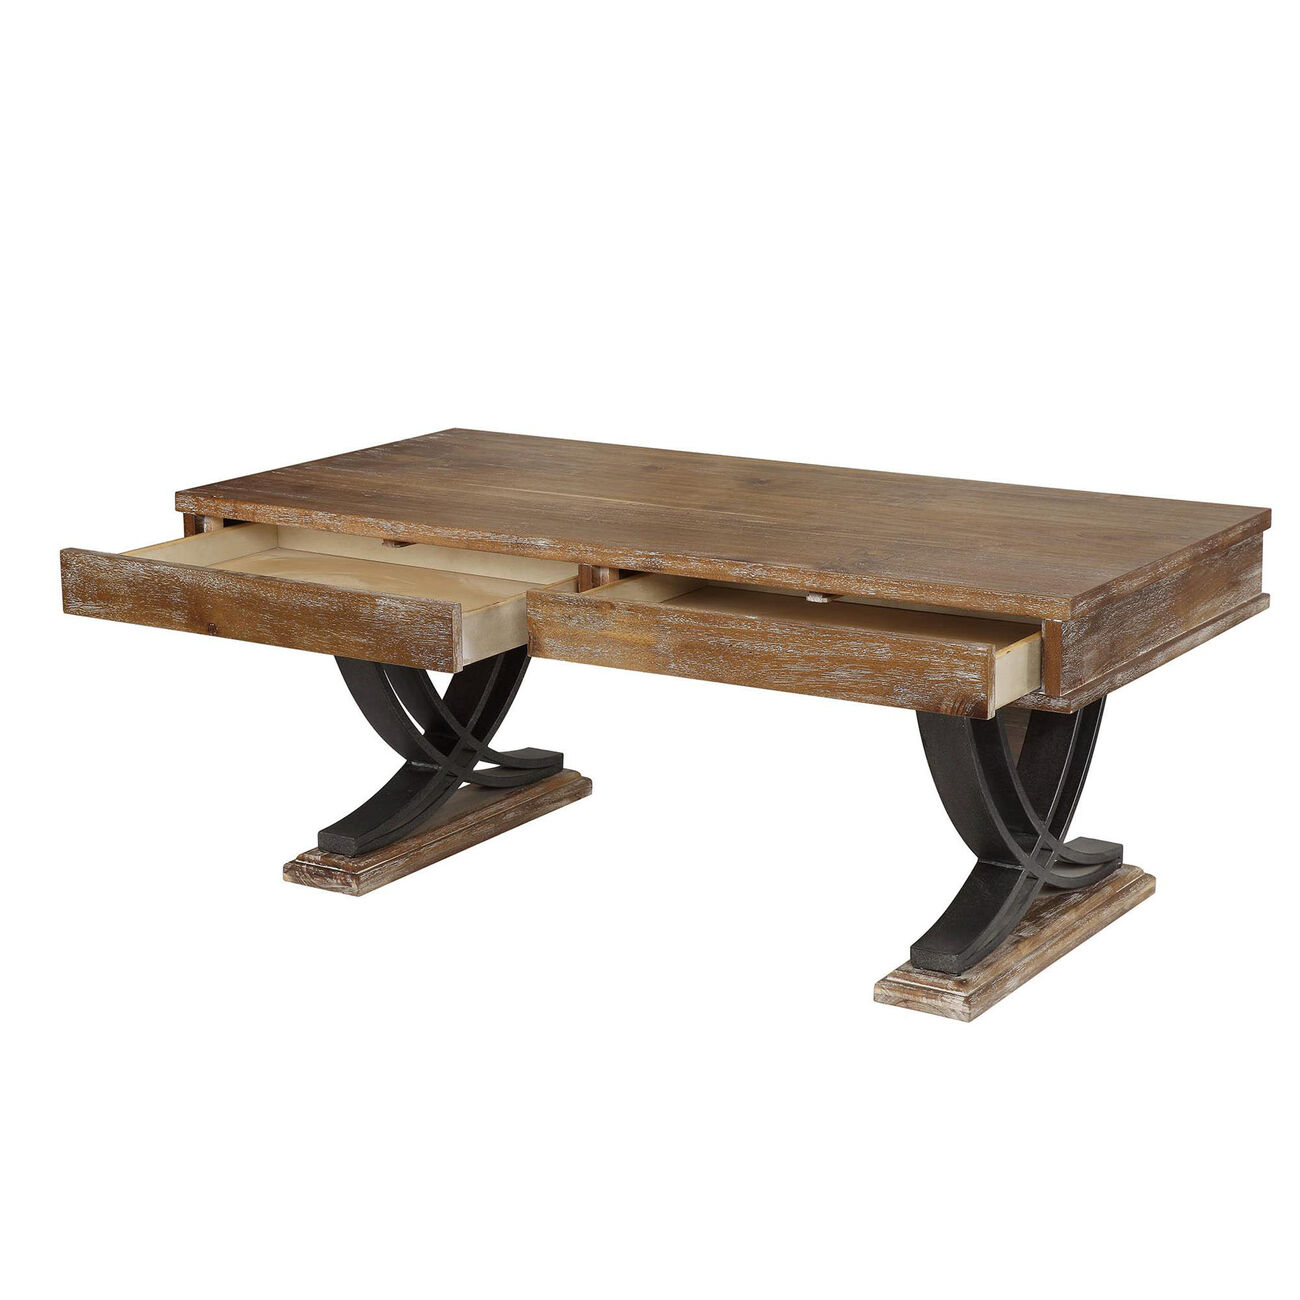 Rustic Wooden Coffee Table with Two Drawers and Metal X Shape Support, Black and Brown